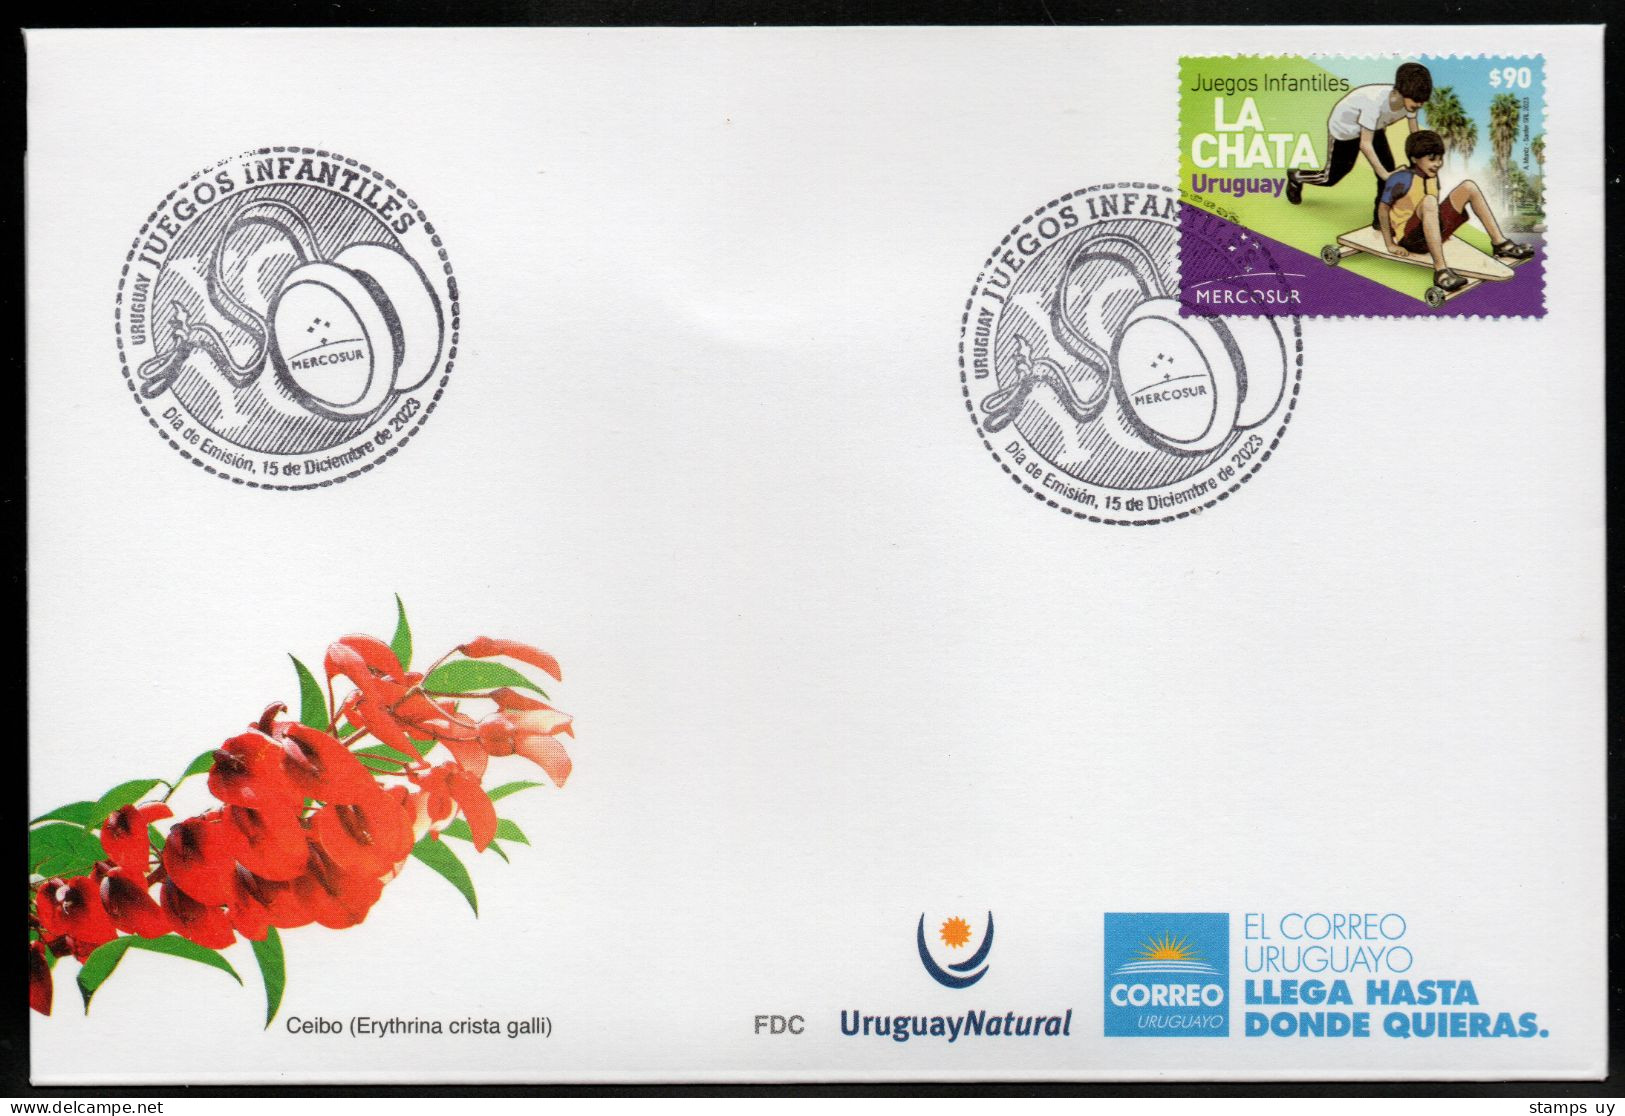 URUGUAY 2023 (Joint Issue, Mercosur, Games, Children, Toys, Wooden Cart, YoYo, Ruleman, Palm, Tree, Crux, Stars) - 1 FDC - Sin Clasificación